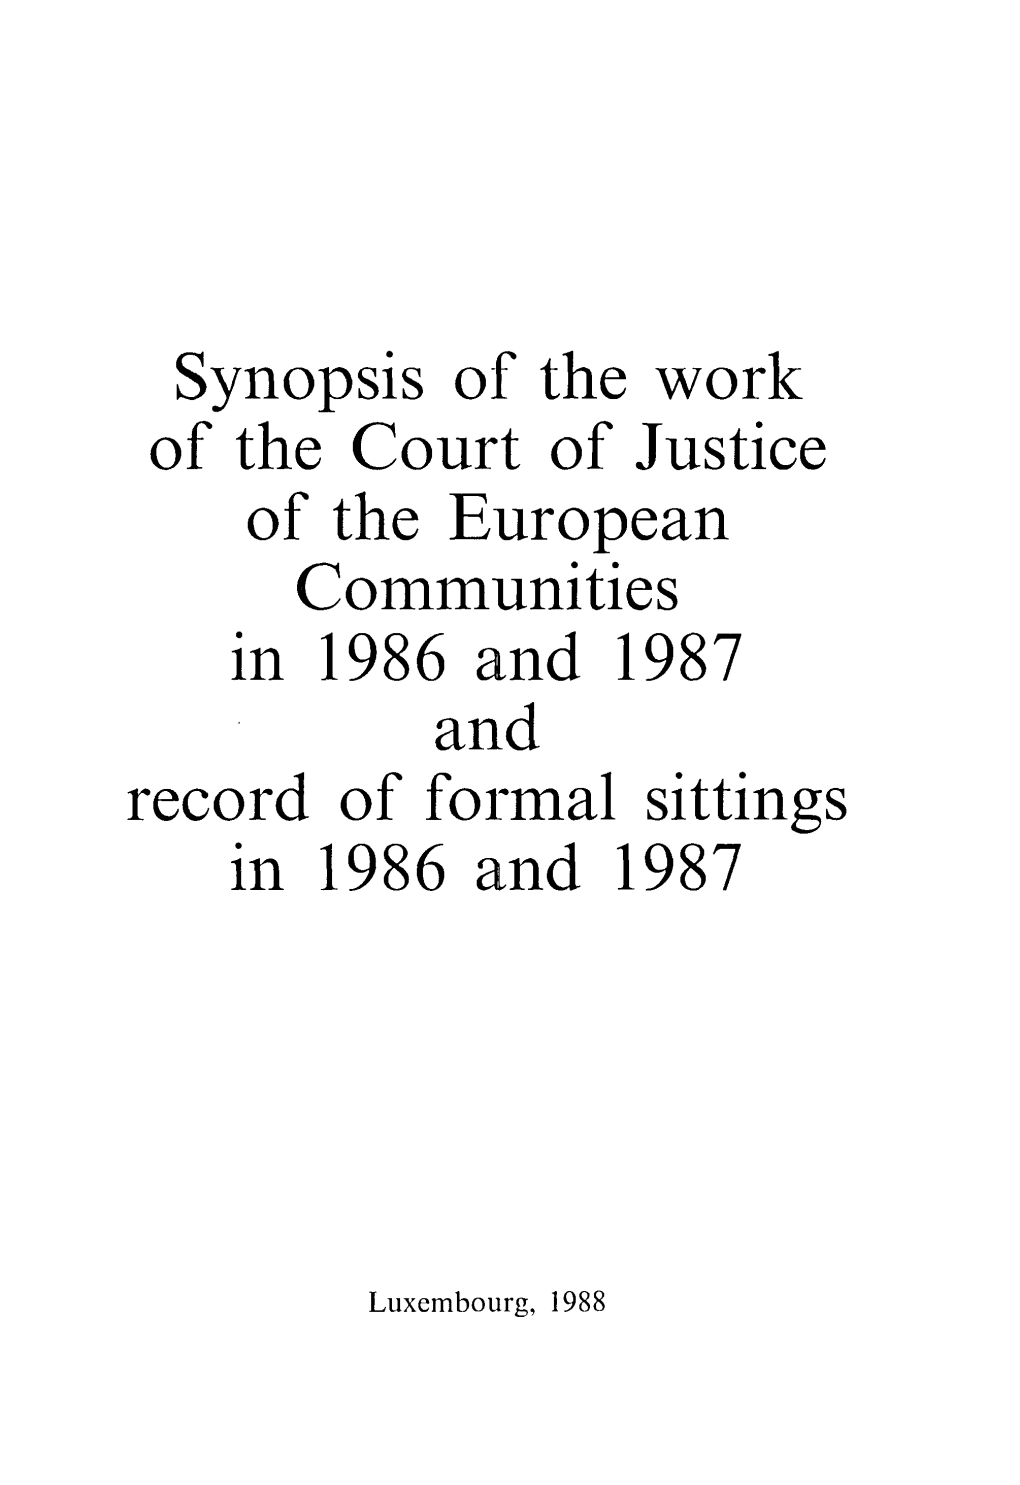 Synopsis of the Work of the Court of Justice of the European Communities in 1986 and 1987 and Record of Foi·Mal Sittings in 1986 and 1987